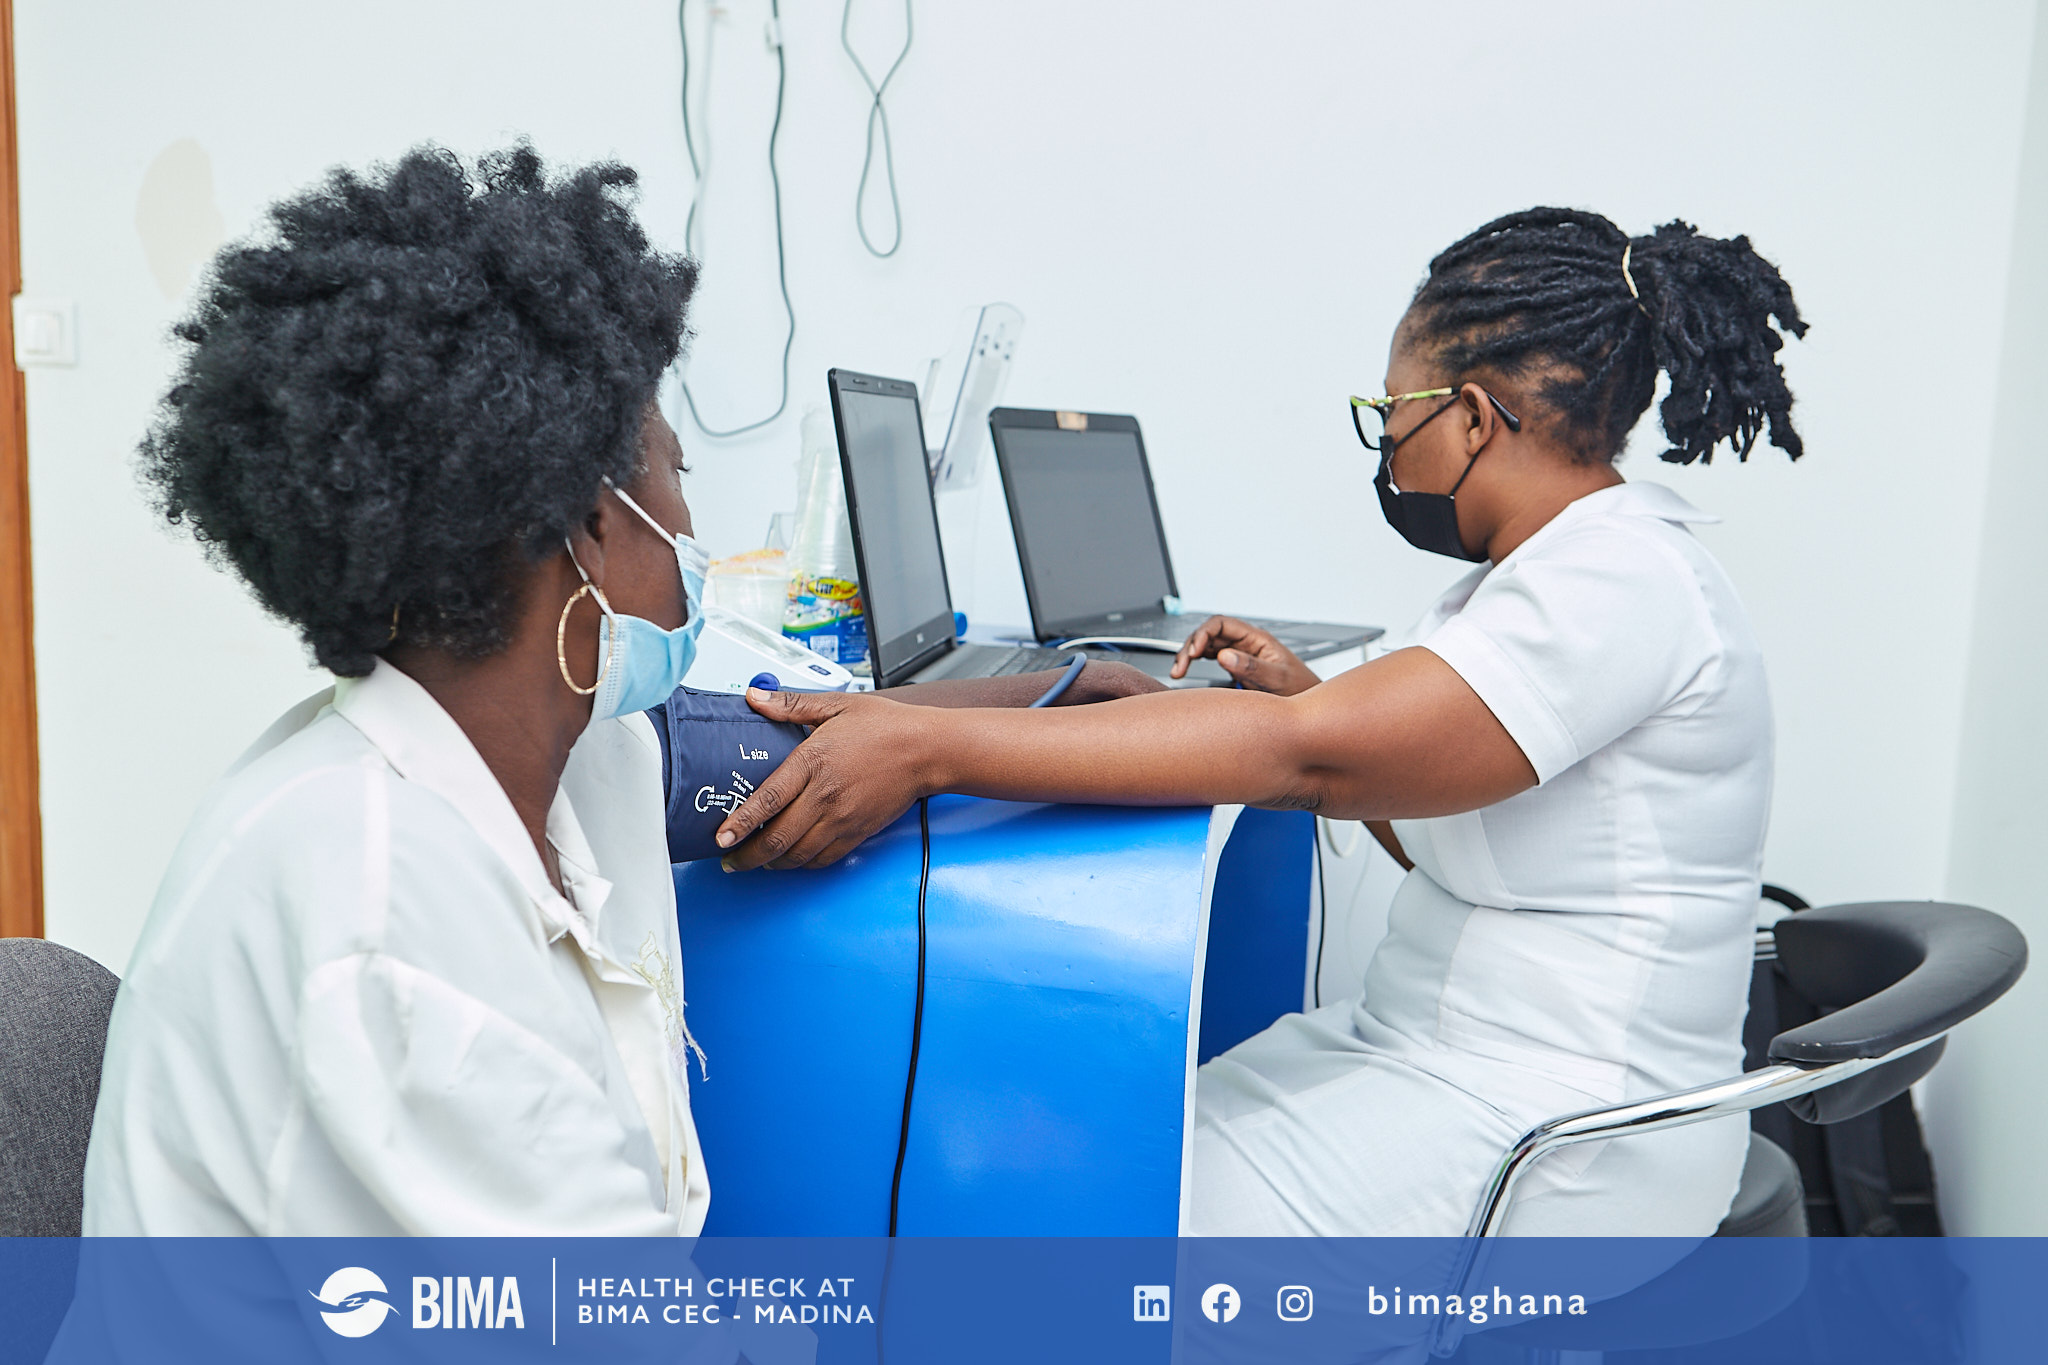 BIMA offers free health screening at its customer experience centres